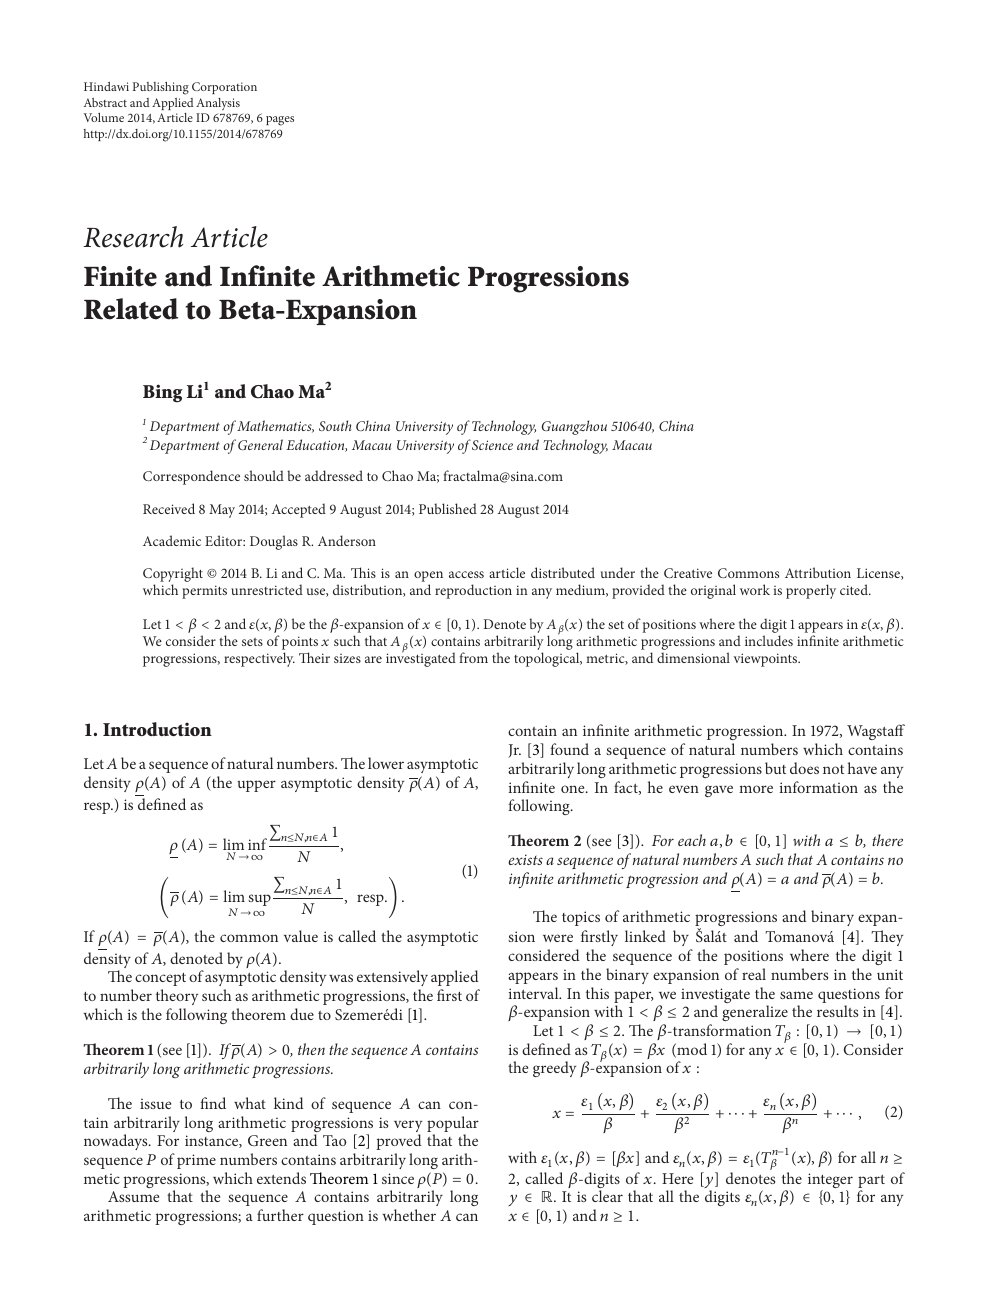 Finite And Infinite Arithmetic Progressions Related To Beta Expansion Topic Of Research Paper In Mathematics Download Scholarly Article Pdf And Read For Free On Cyberleninka Open Science Hub